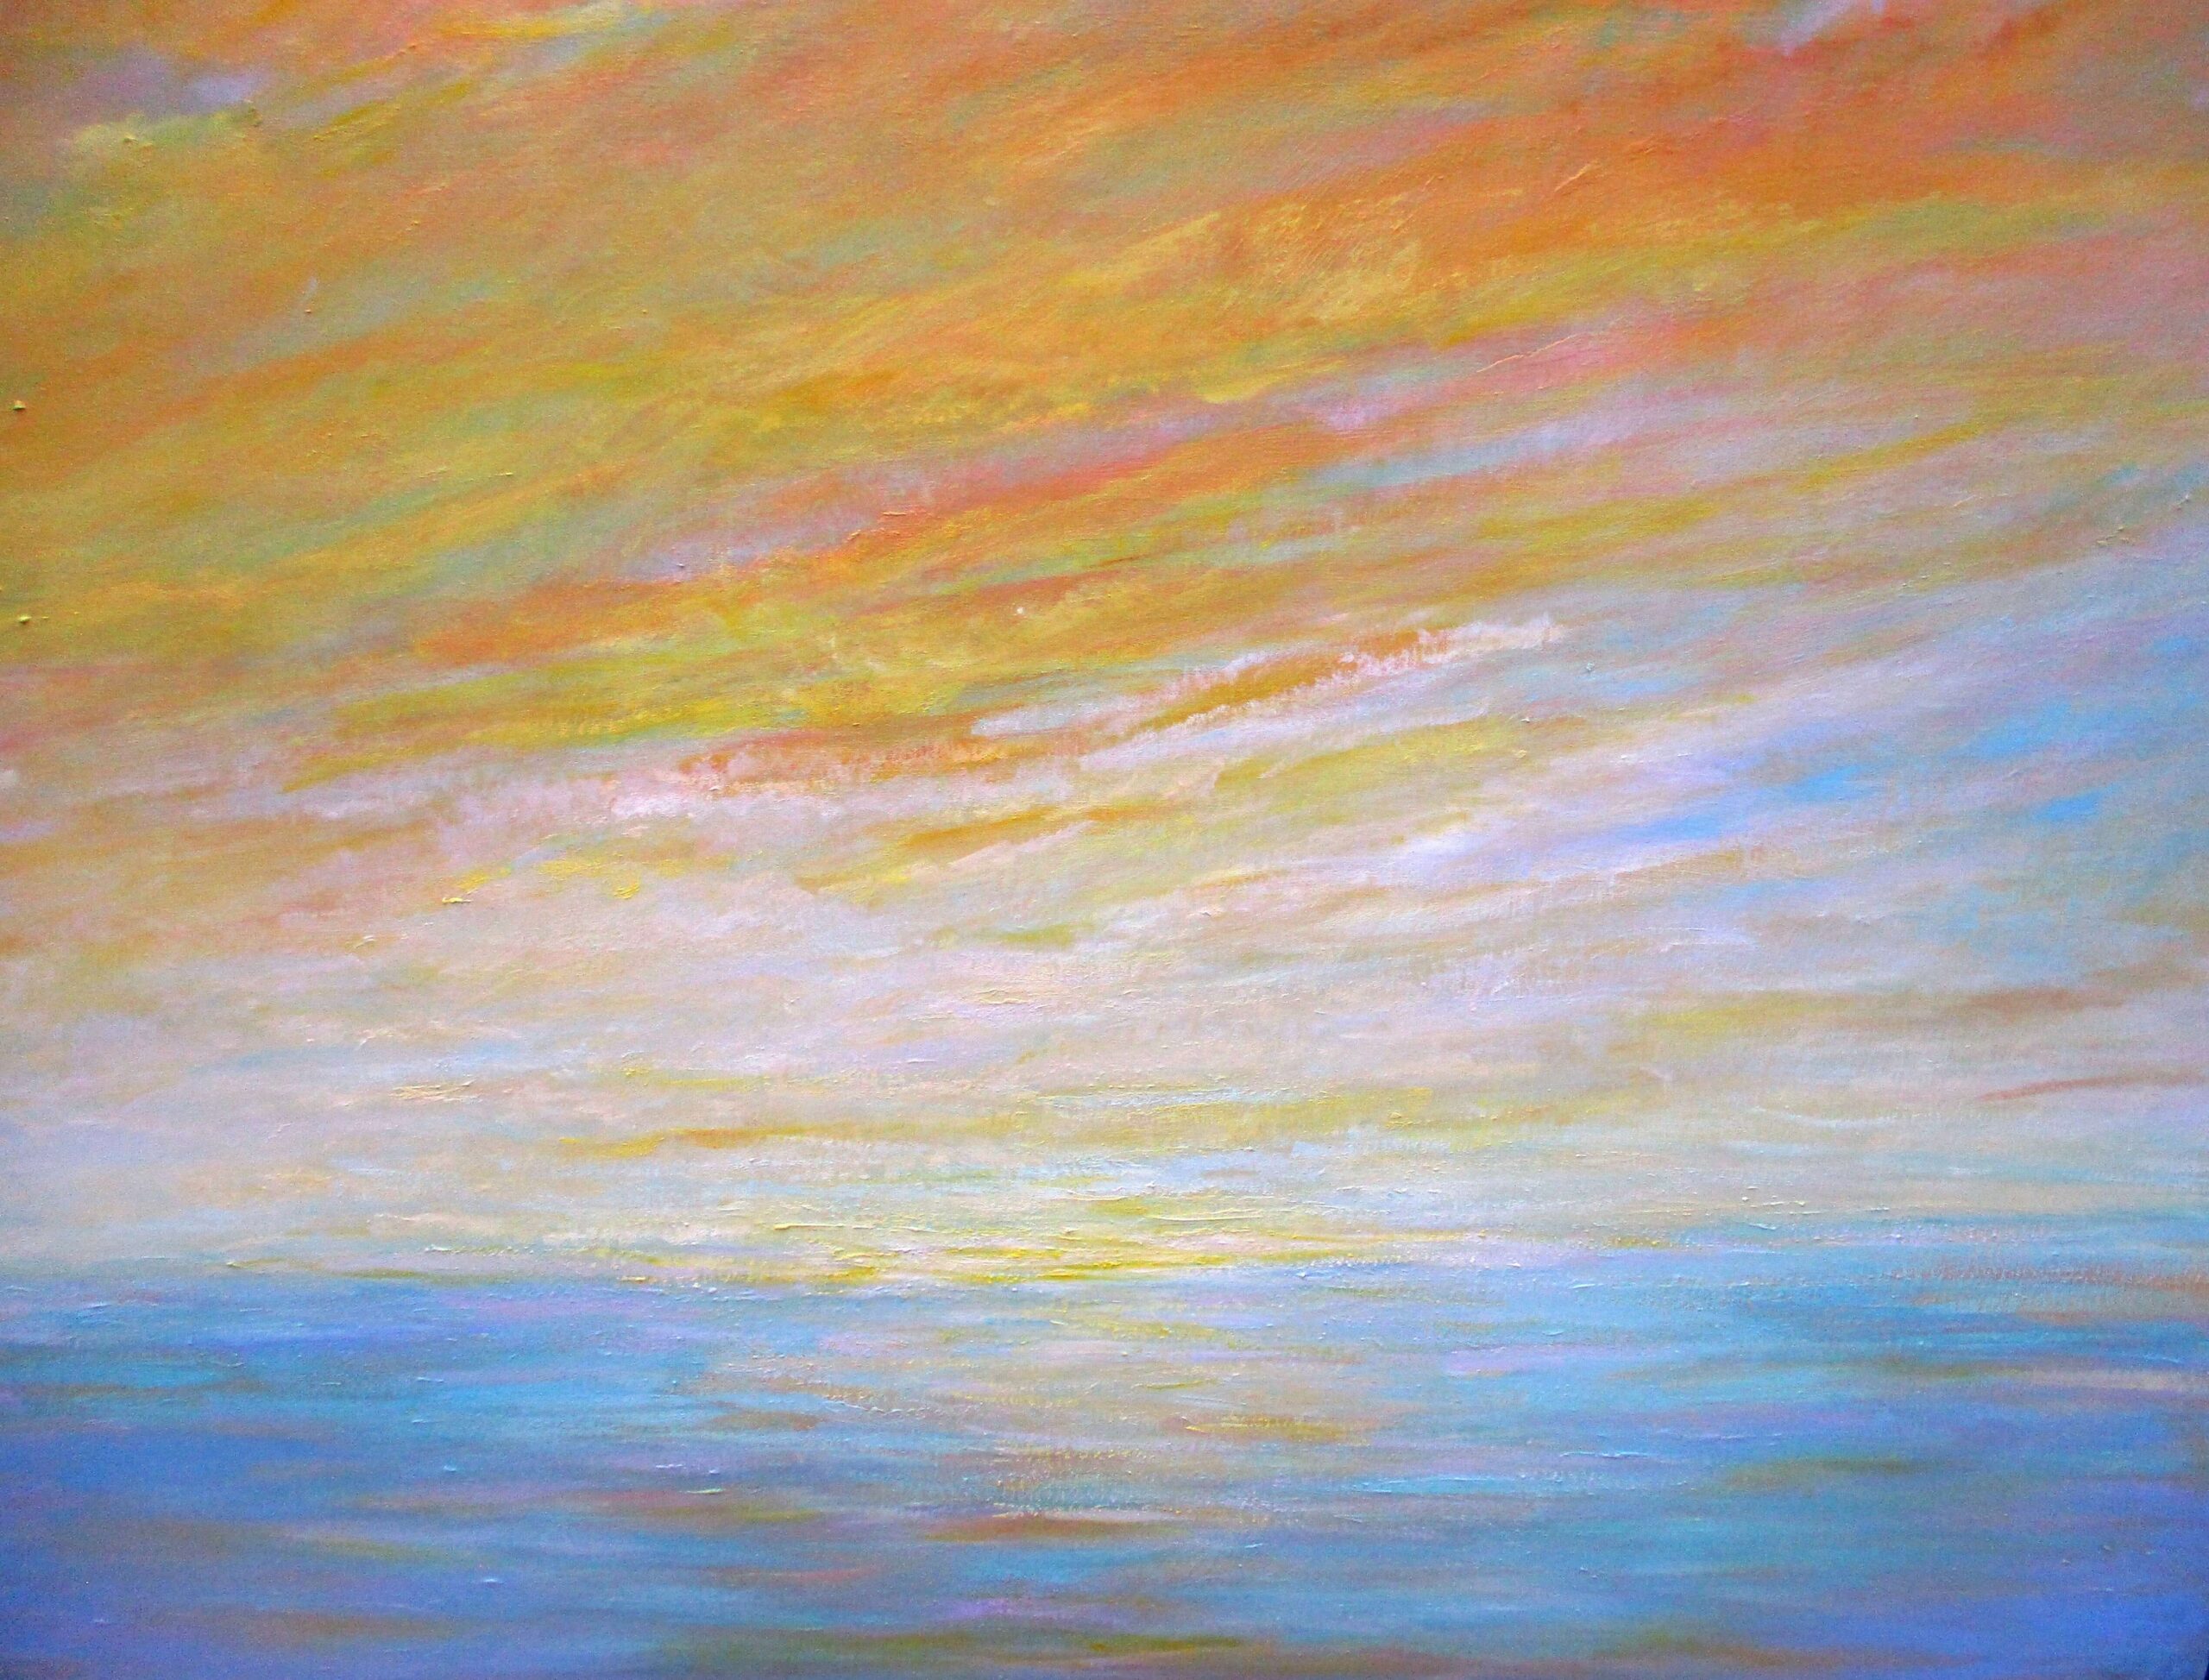 Summer Sky, Oil on Canvas - Land and Sea